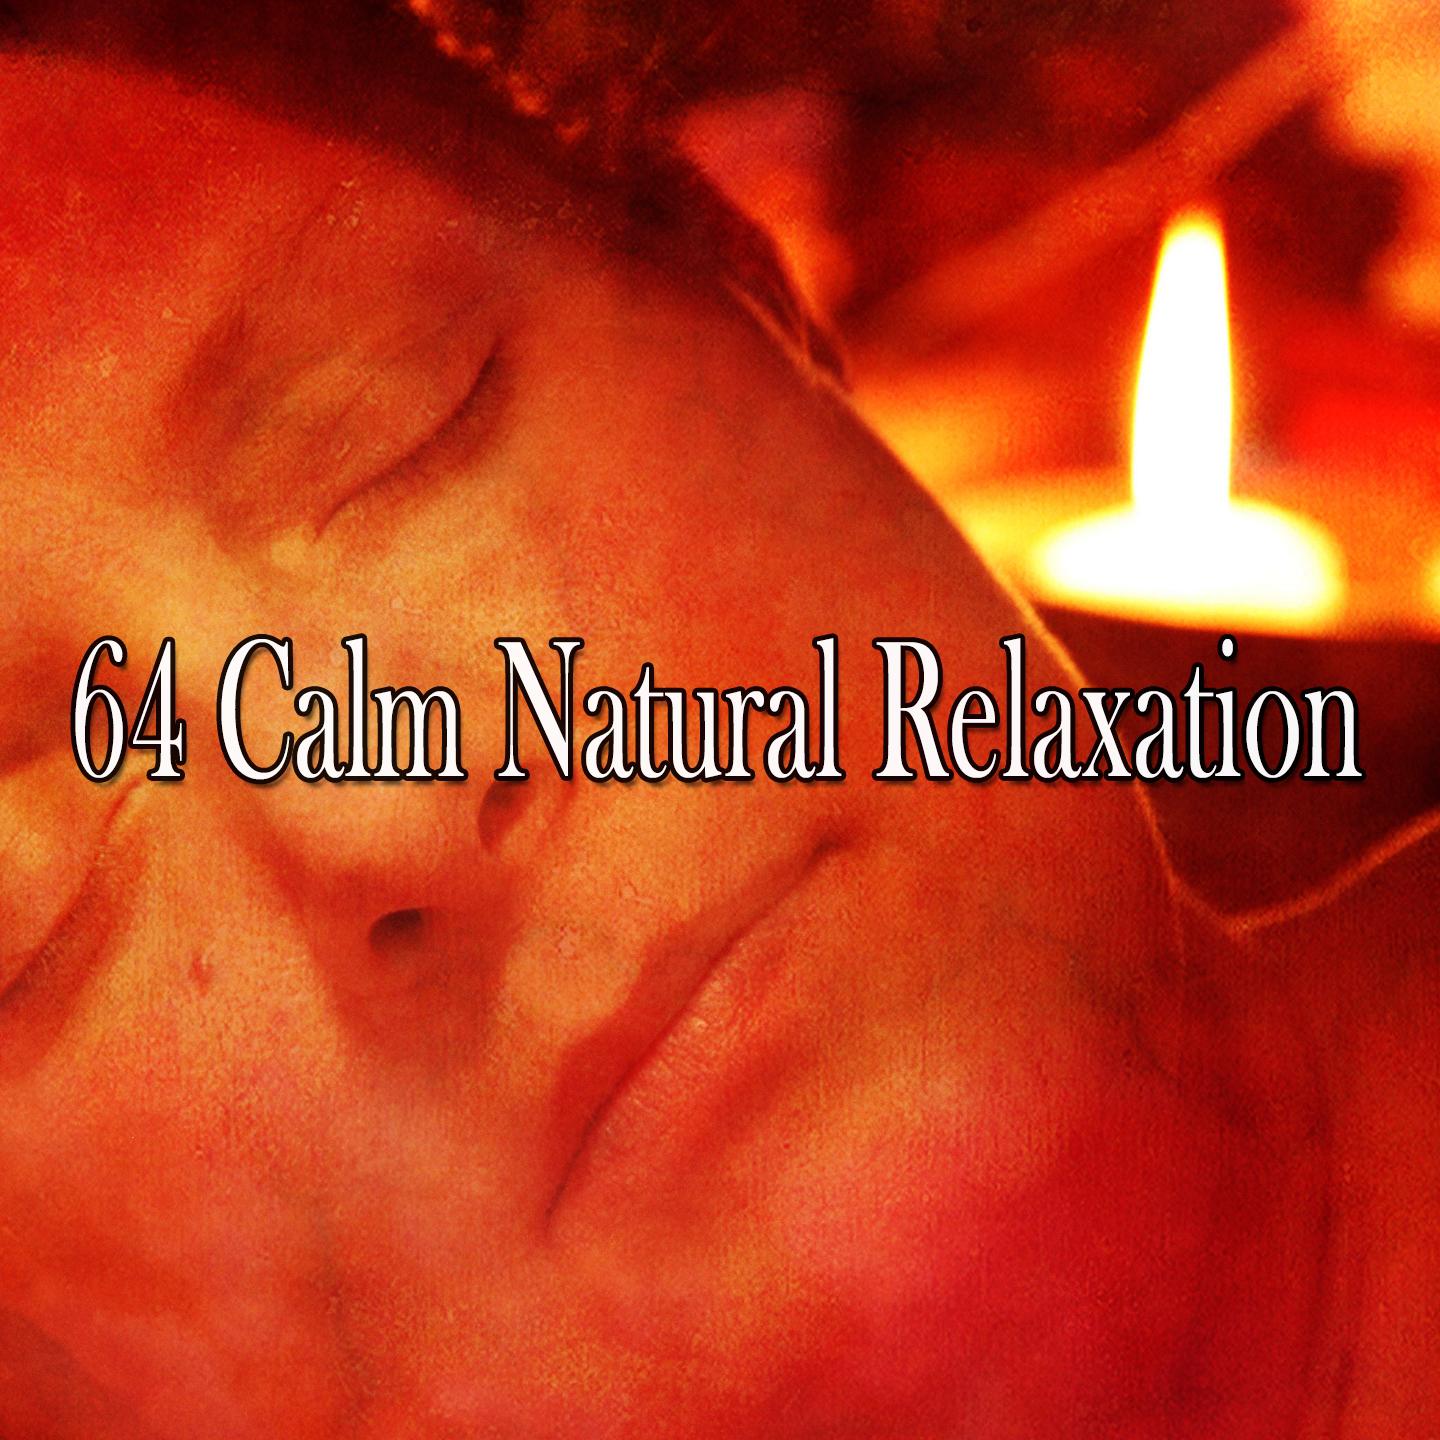 64 Calm Natural Relaxation